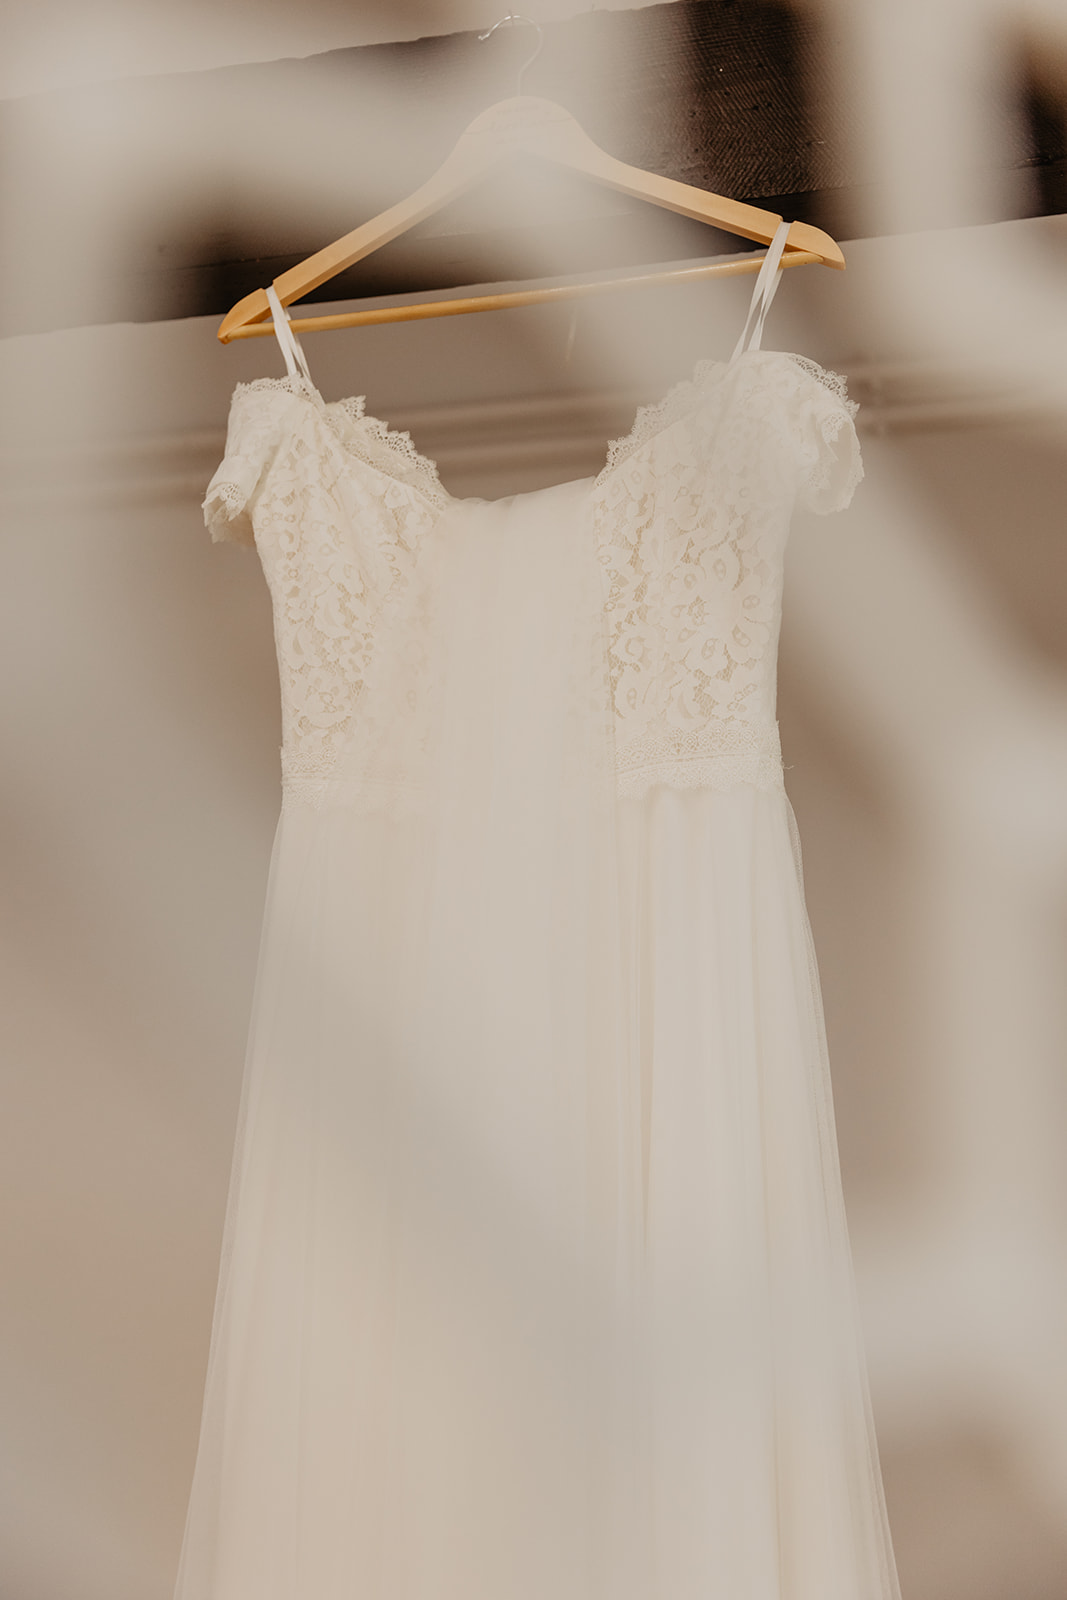 Hanging wedding dress at Field Place Wedding Worthing, Sussex. By OliveJoy Photography.